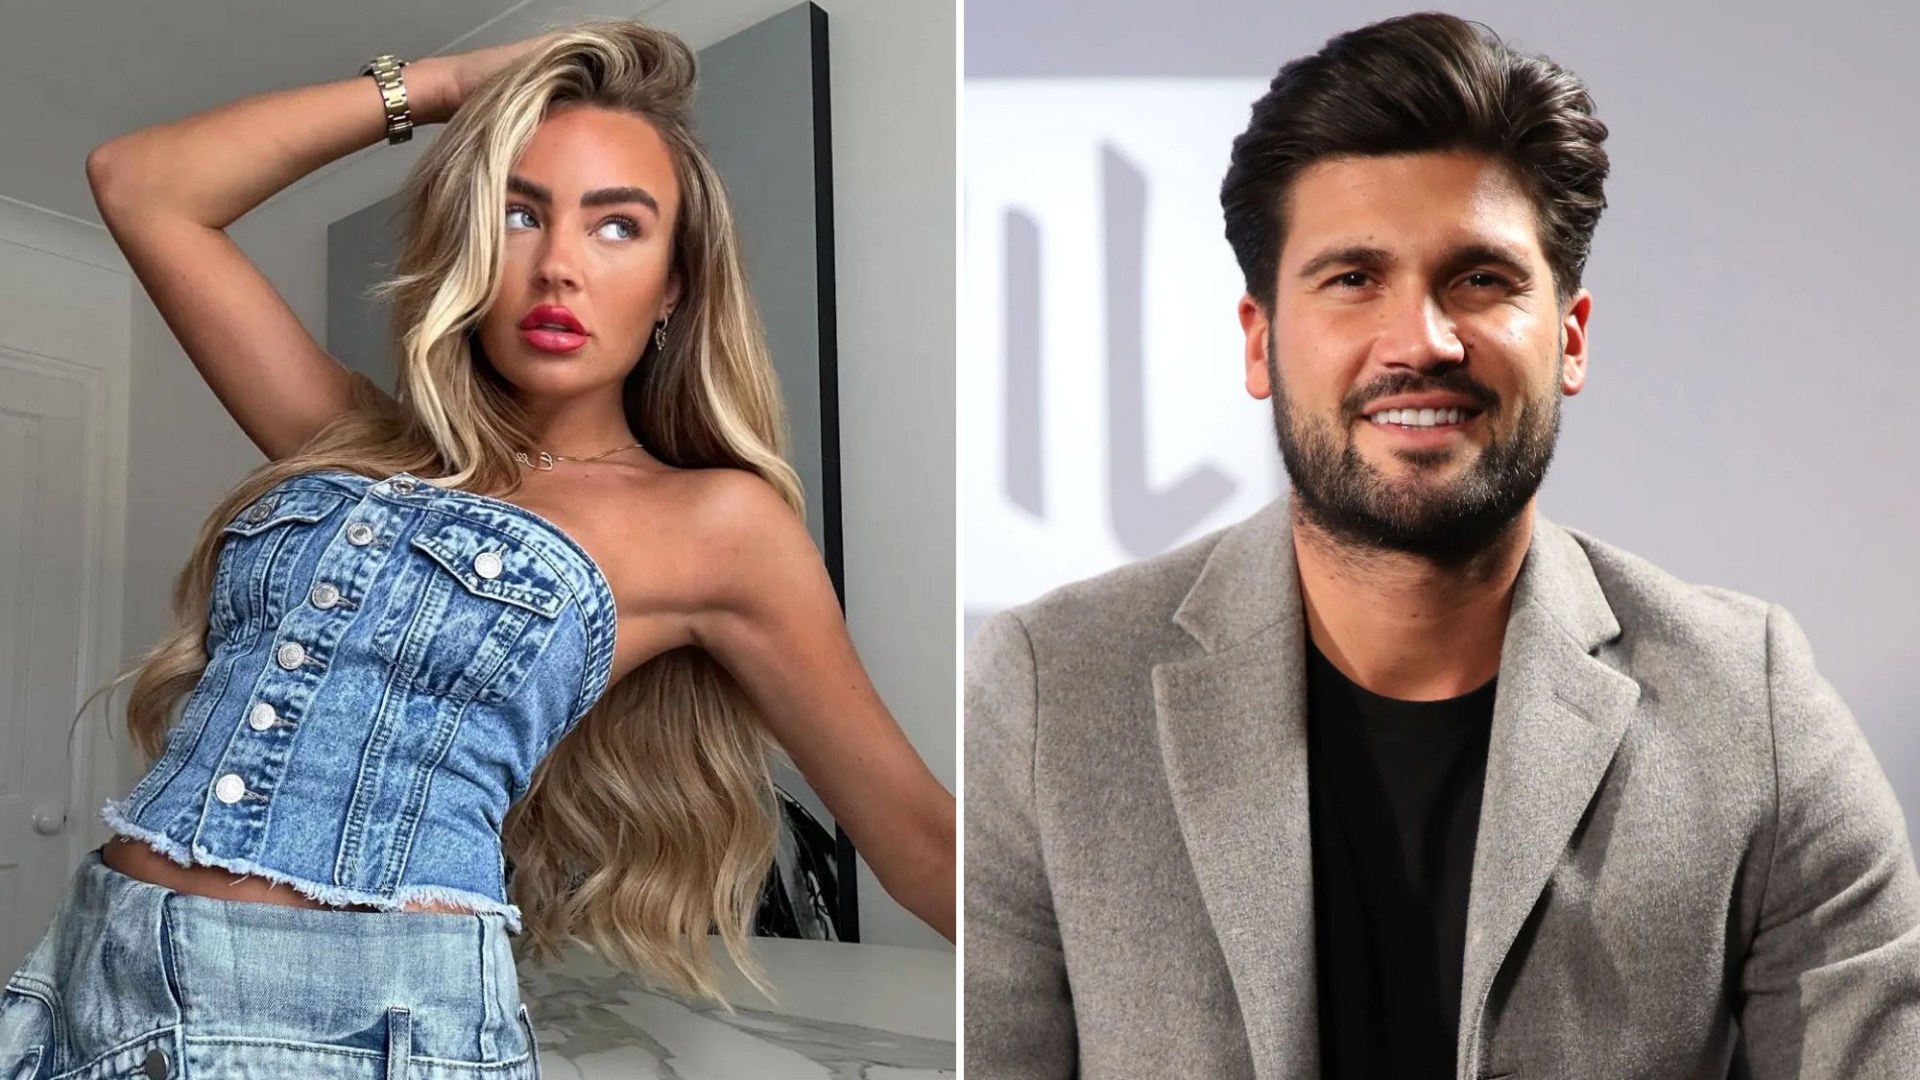 Towie’s Ella Rae Wise fuels feud rumours with ‘cheating’ Dan Edgar as she takes cryptic new swipe at him [Video]